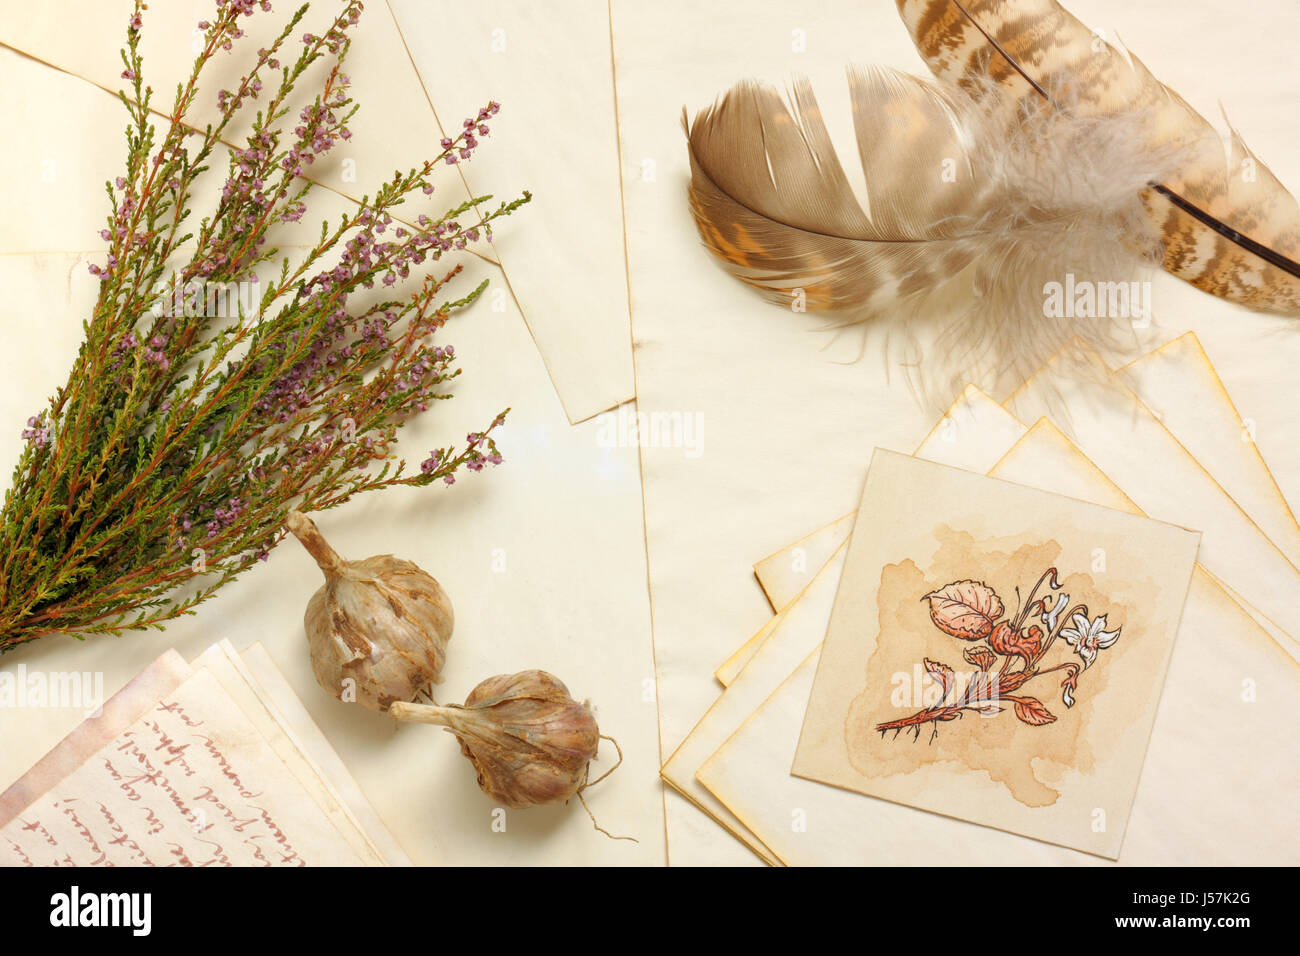 Nostalgic vintage still life with garlic, botanical drawing, bunch of dried heather and feathers over aged paper sheets Stock Photo